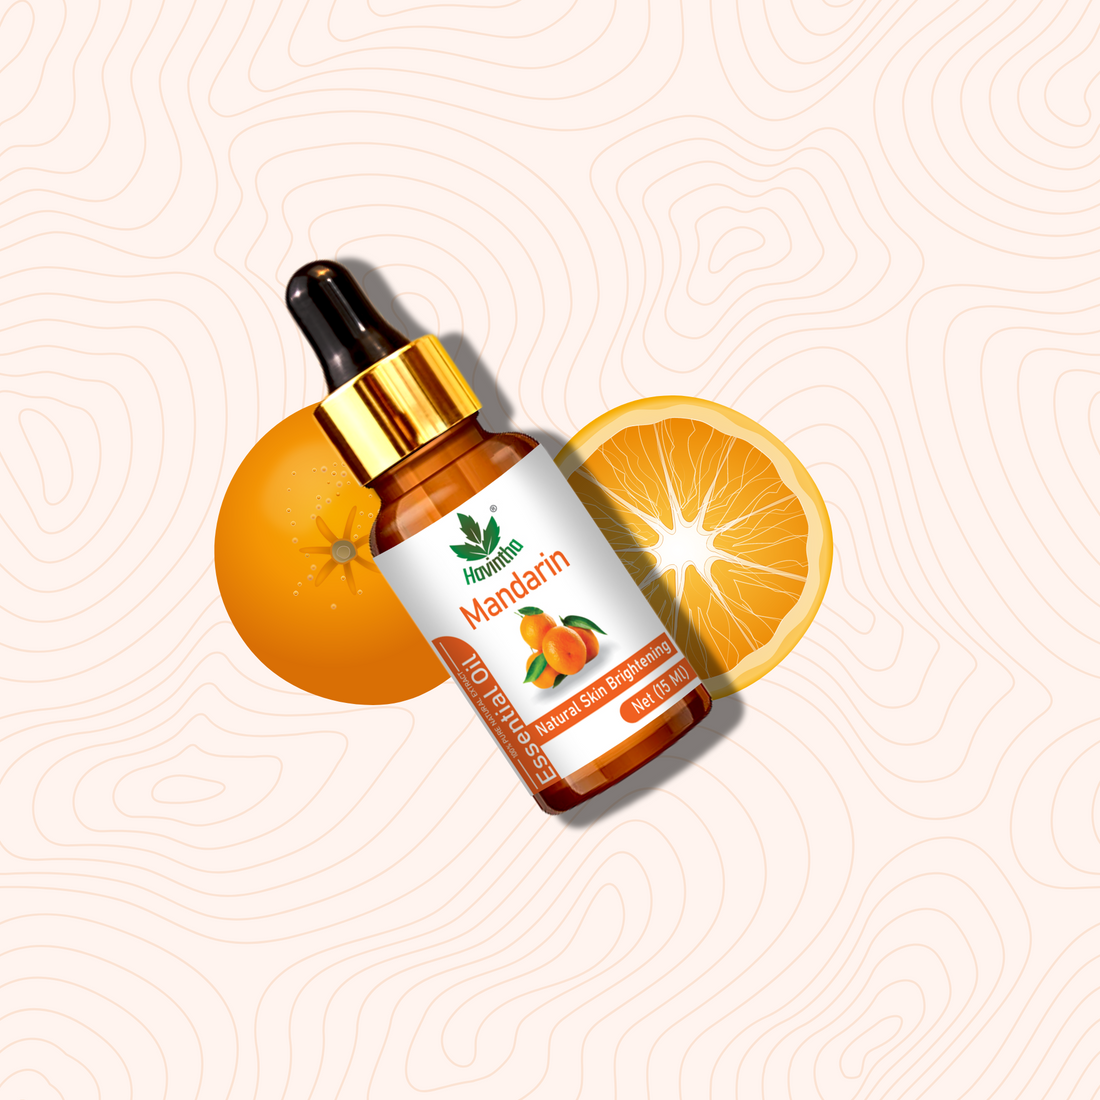 Havintha Pure and Organic Mandarin Essential Oil for Hair Care , Acne &amp; Wrinkles and Aromatherapy-15 ml.